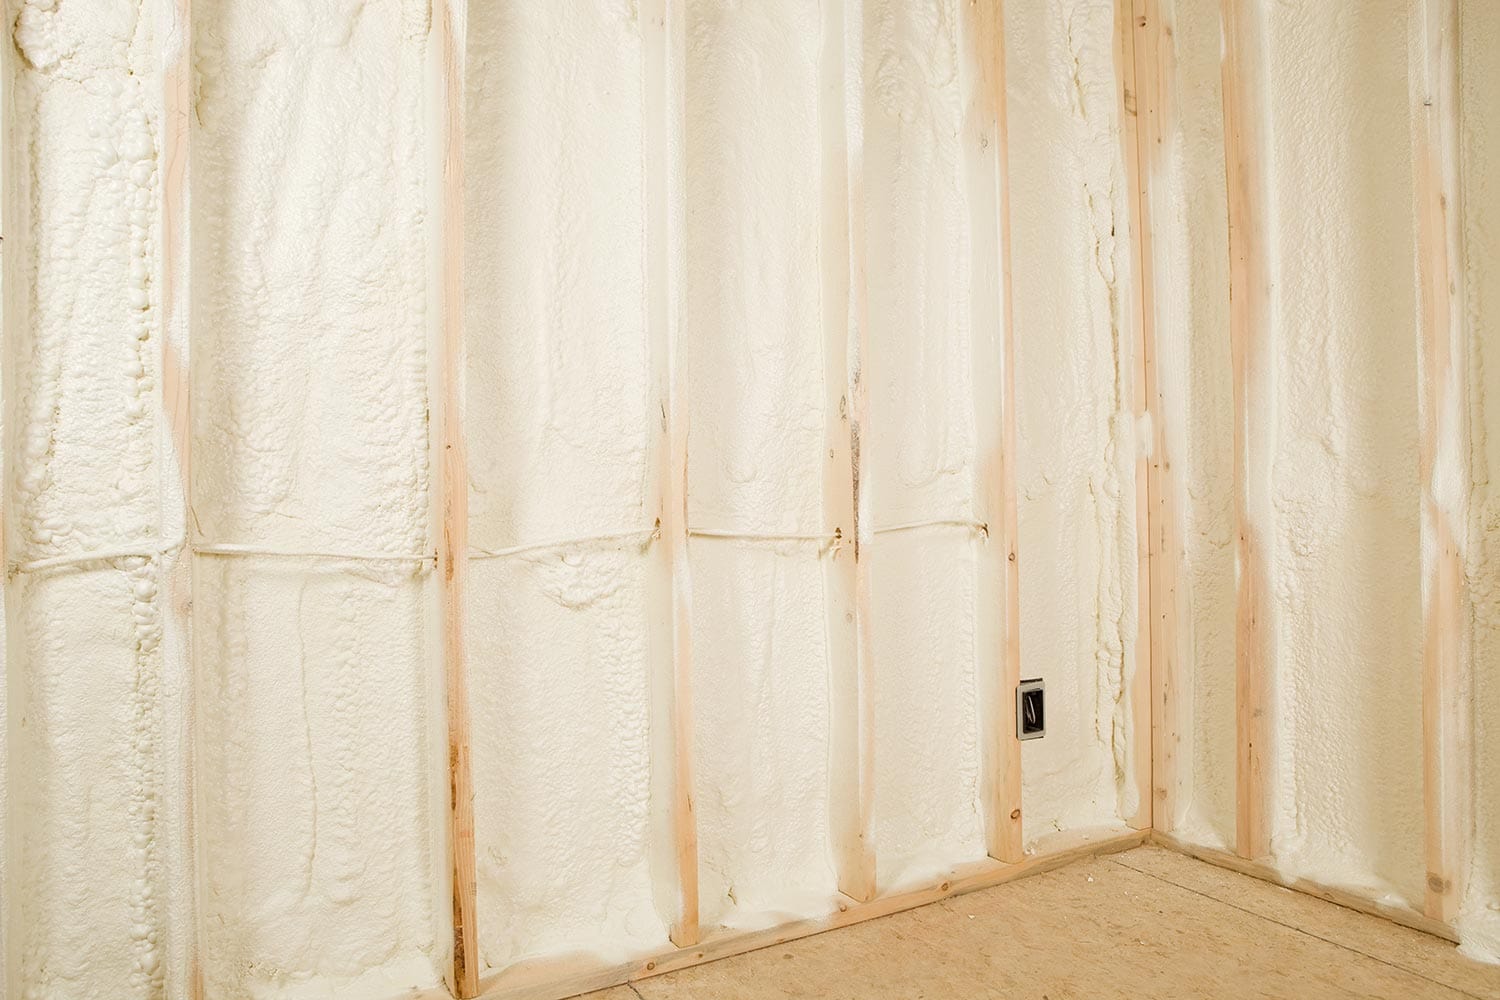 New home construction walls sprayed with expandable foam insulation